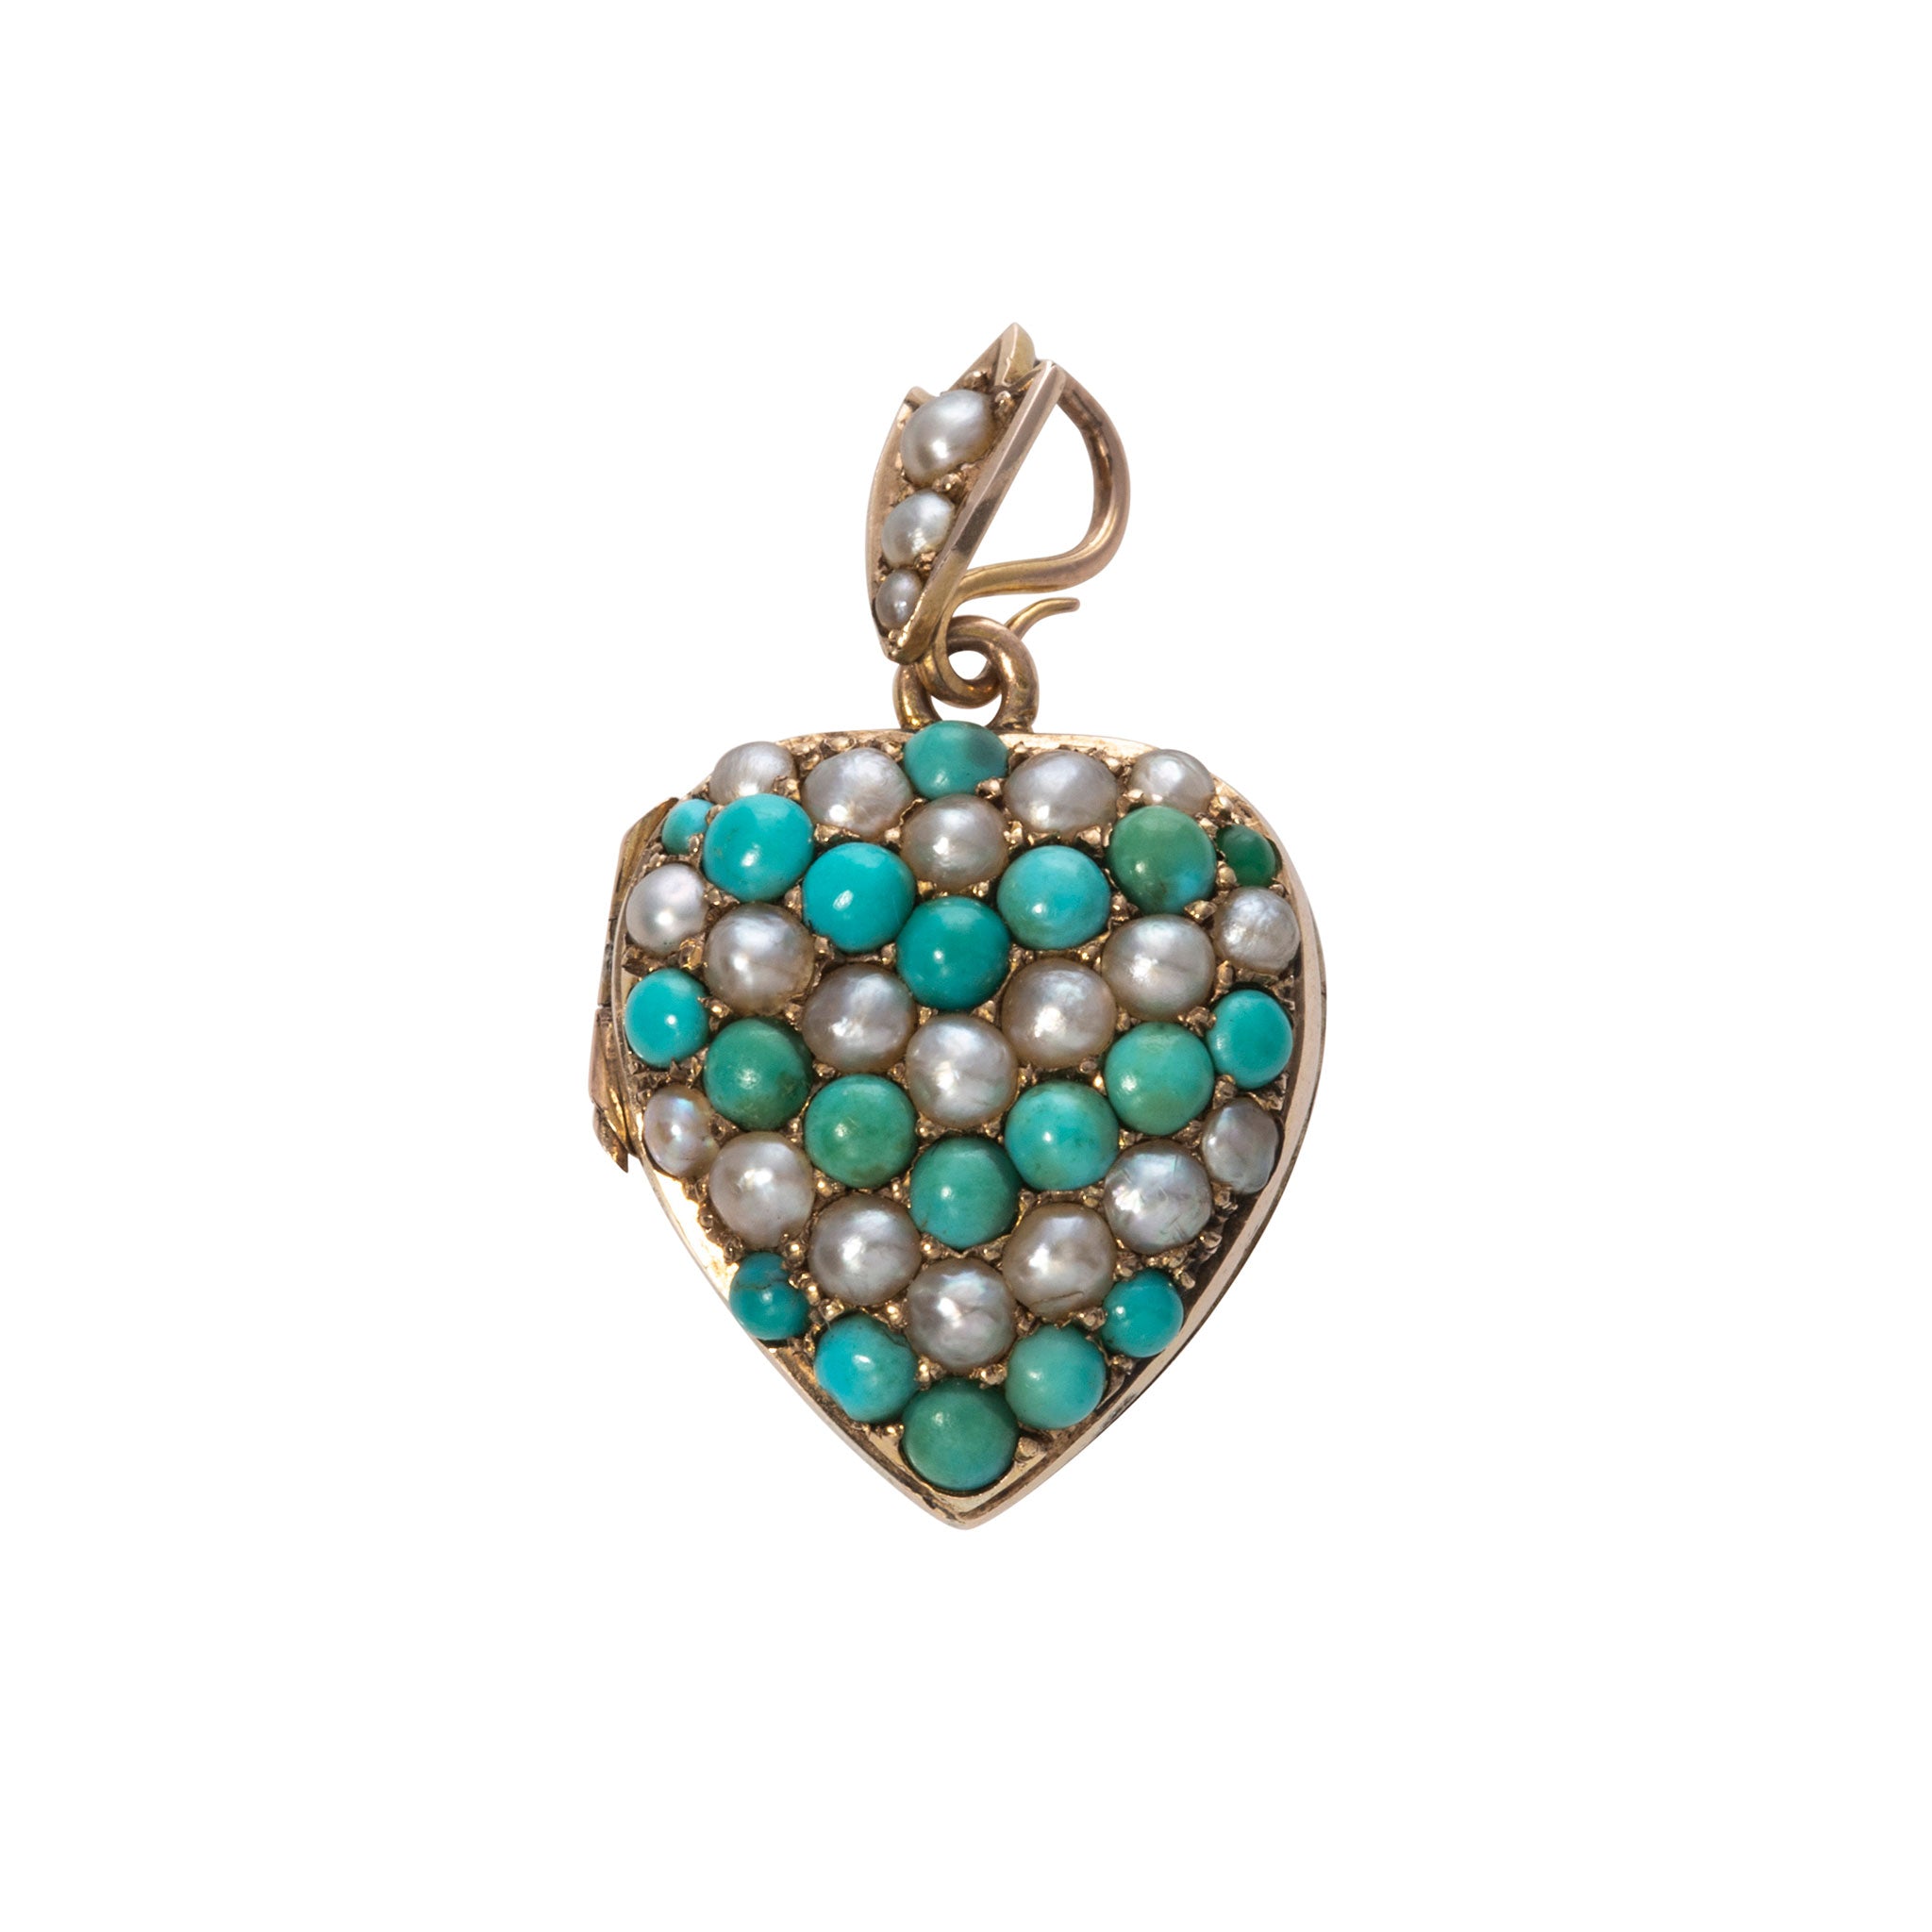 Victorian Turquoise & Seed Pearl 9K Gold Heart Locket Pendant